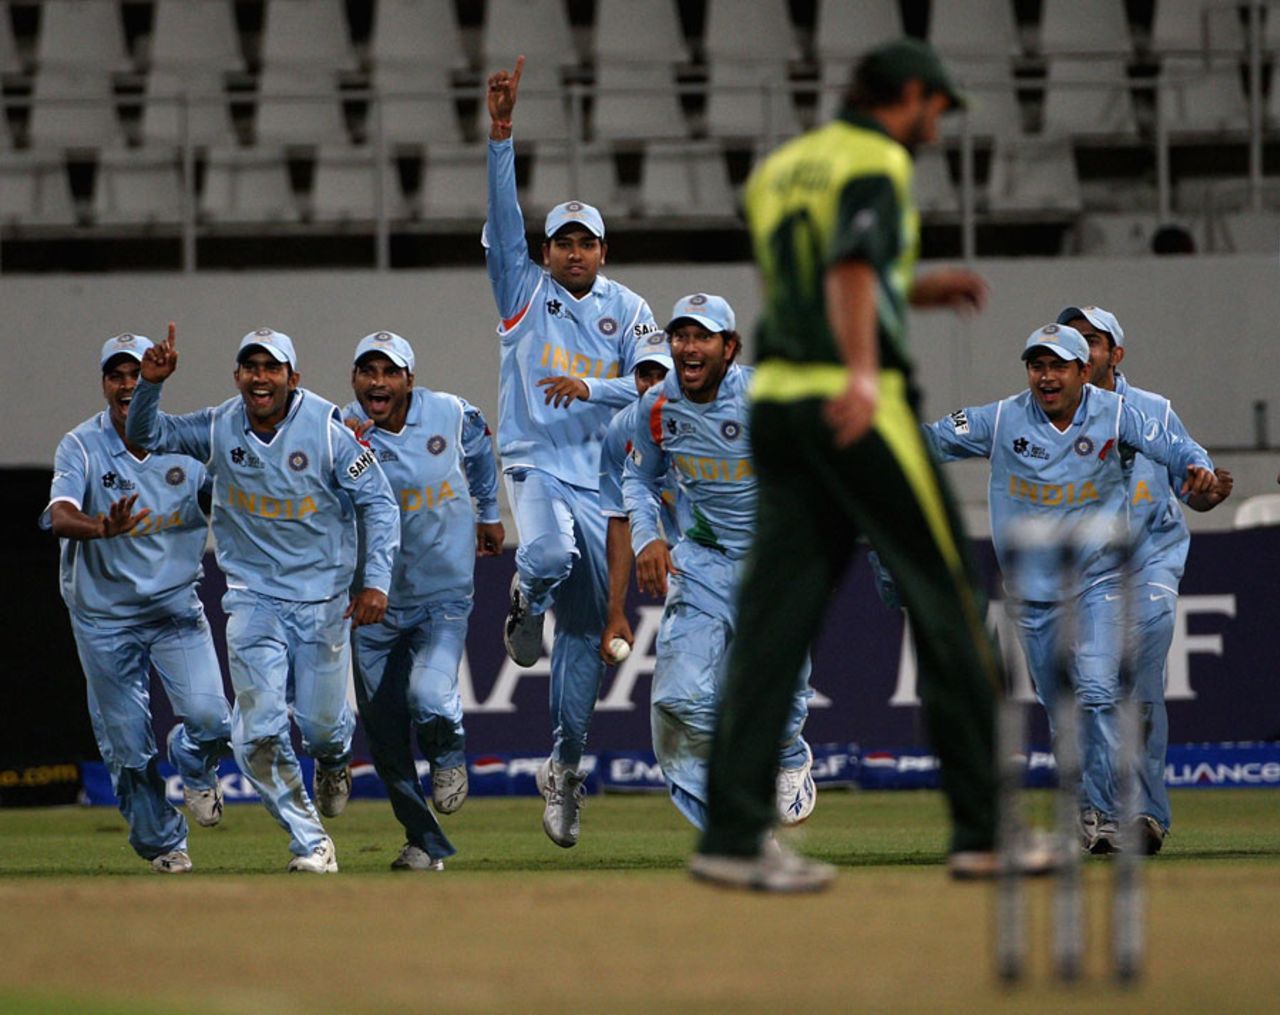 Shahid Afridi's miss meant that India won the bowl-out 3-0, India v Pakistan, Group D, ICC World Twenty20, Durban, September 14, 2007 